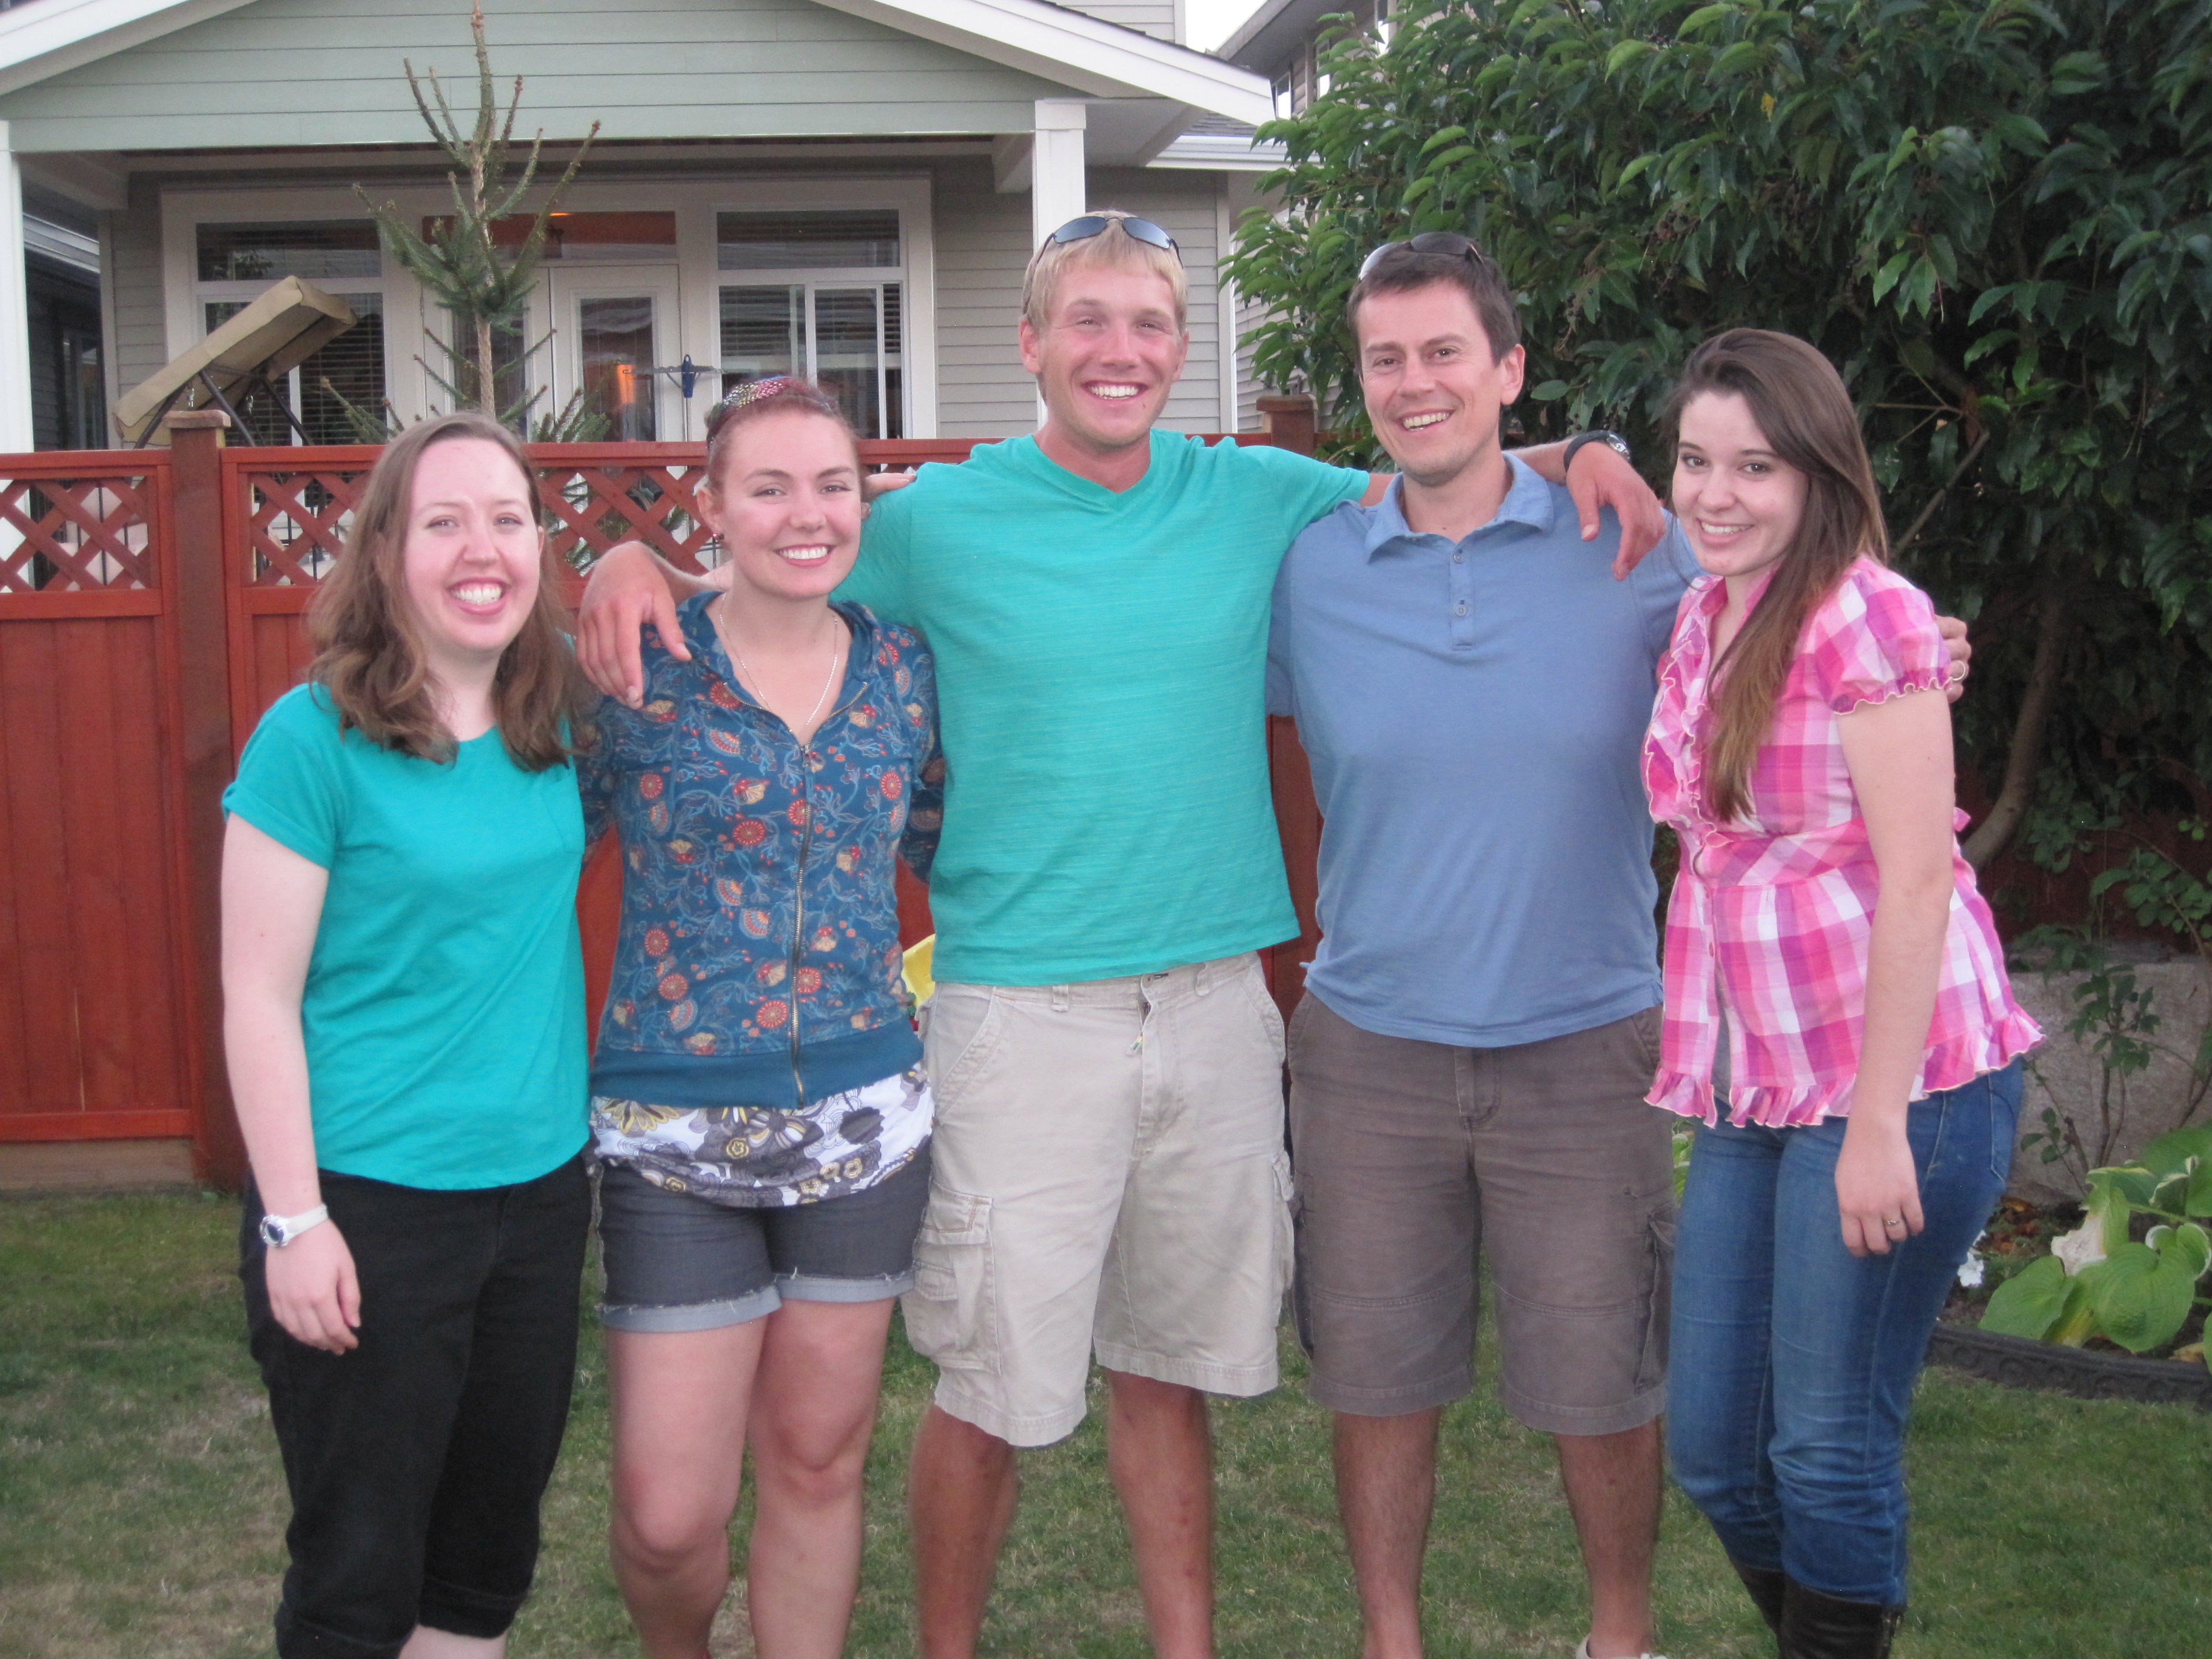 A group of students pose on a grass lawn at the Rider Group BBQ in summer 2014